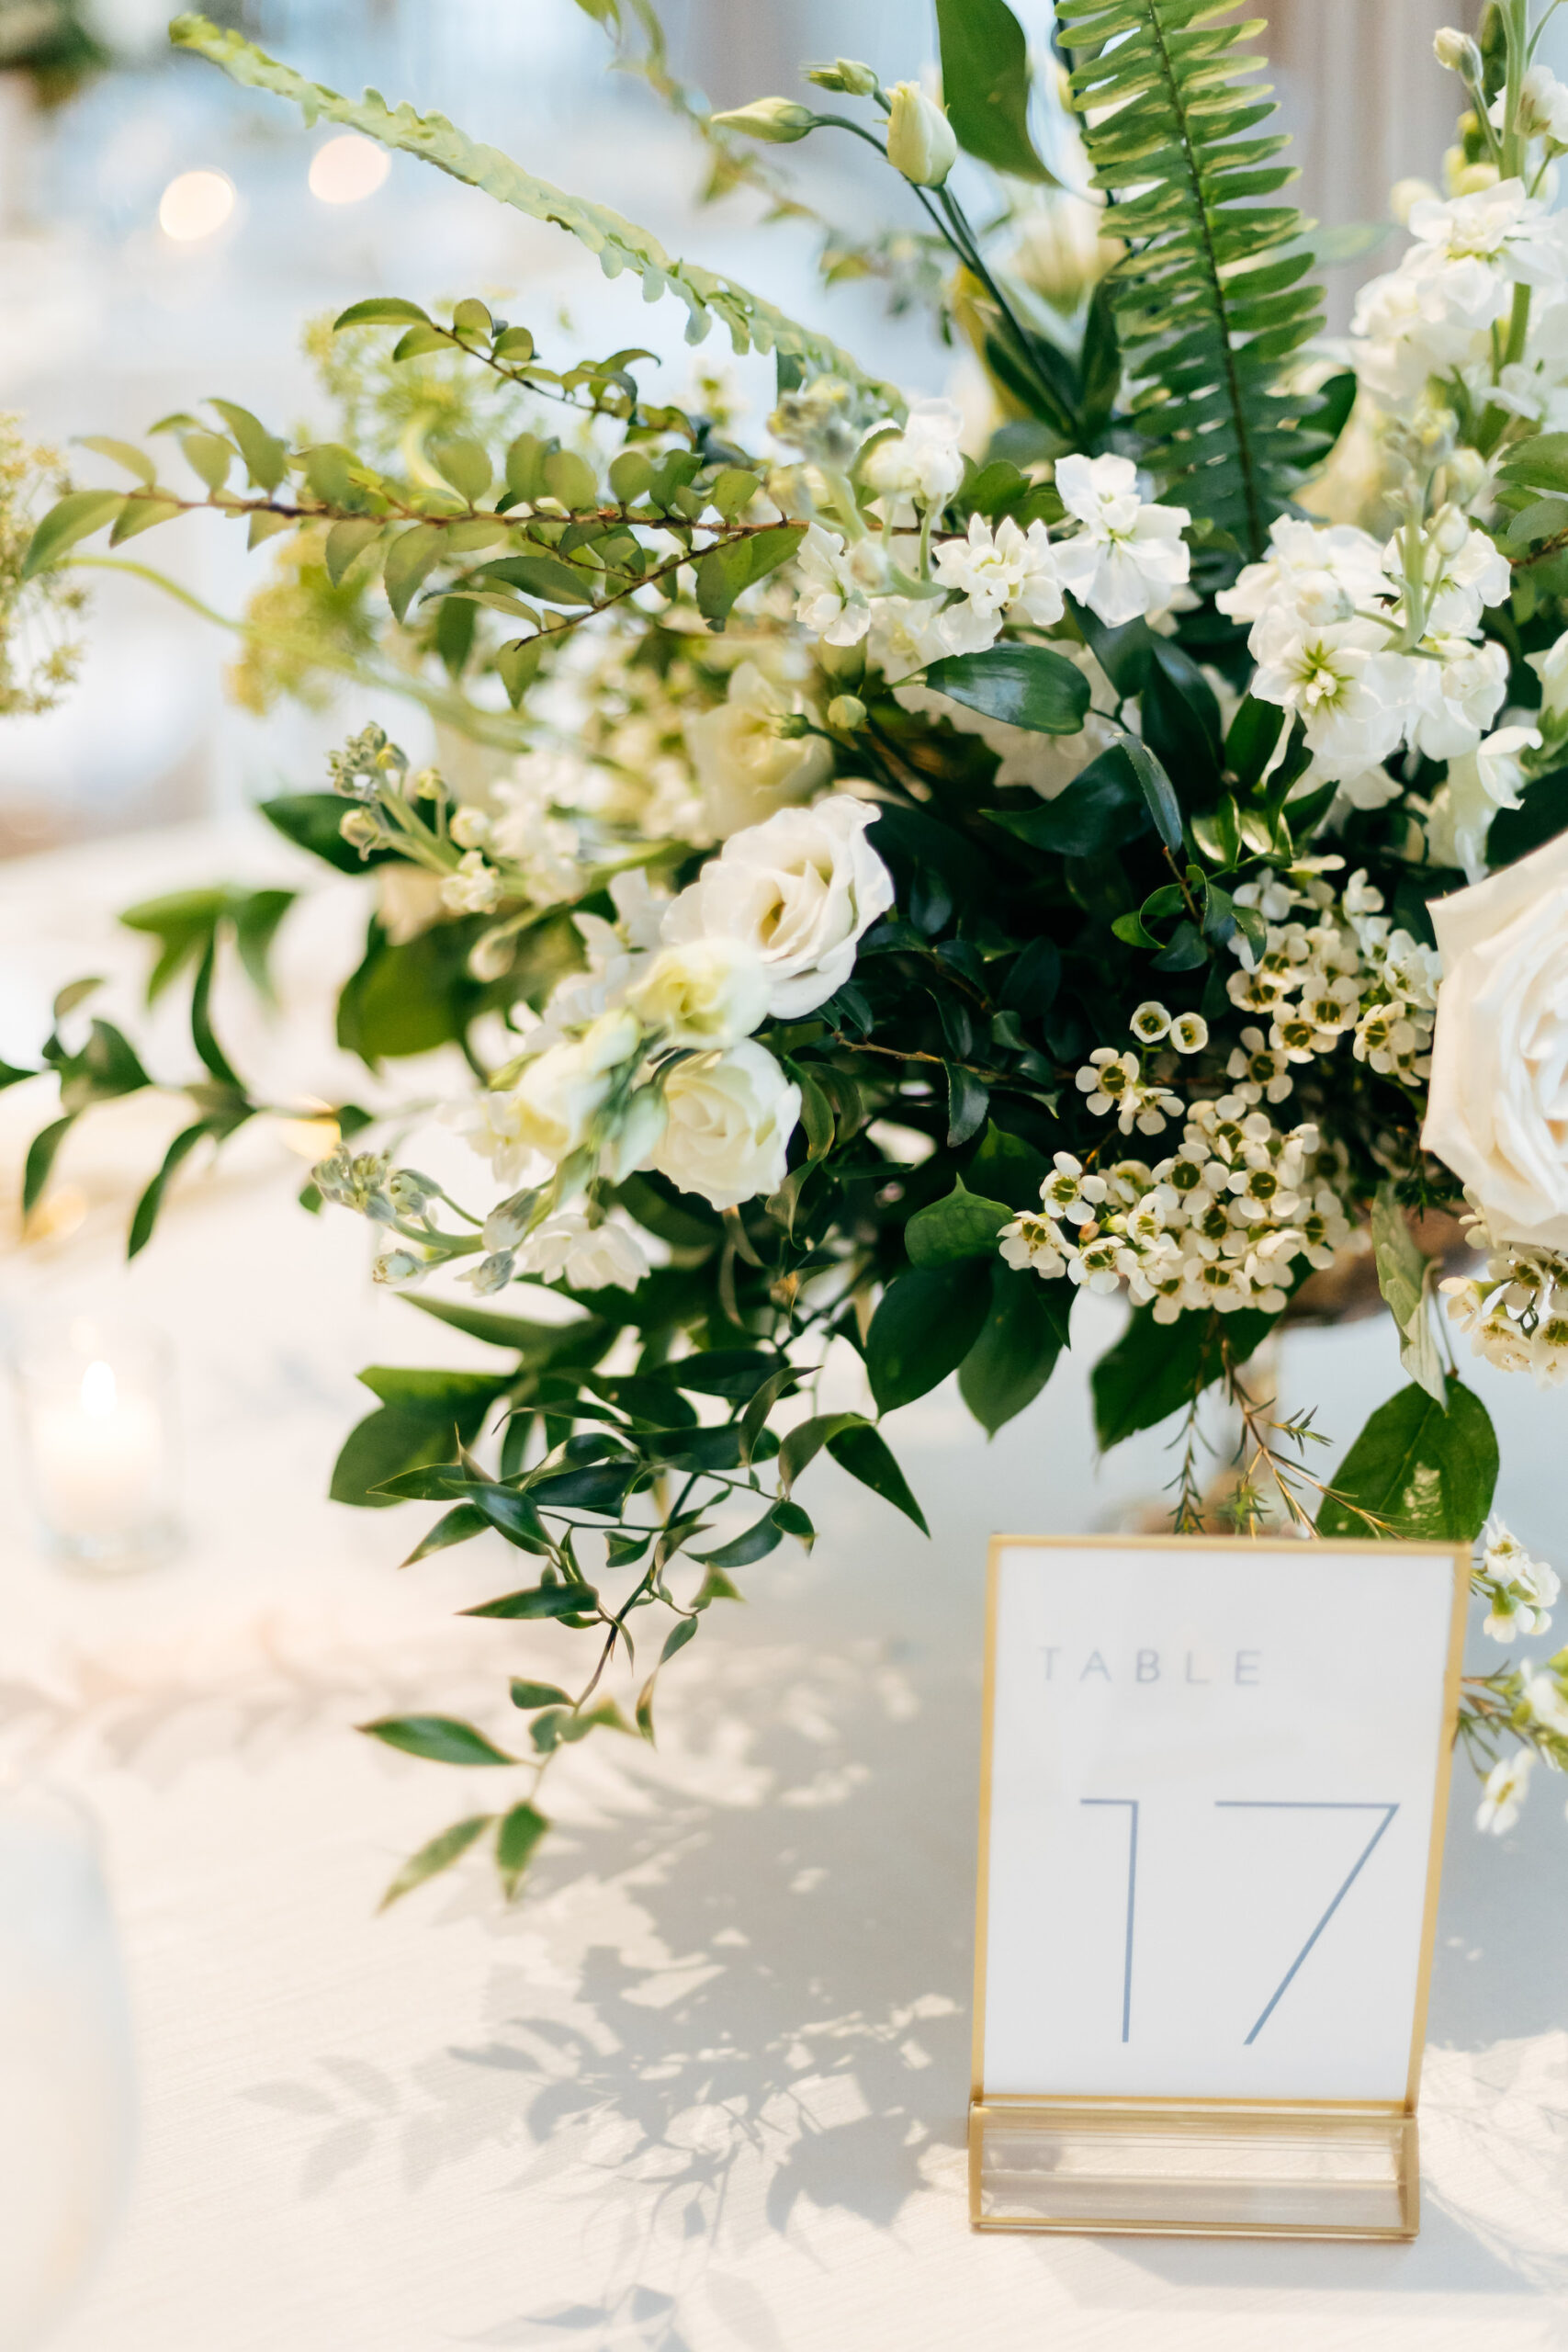 Modern Gold Frame Table Number, Floral Centerpiece with Greenery, White Roses, Cream Flowers | Tampa Bay Wedding Florist Bruce Wayne Florals